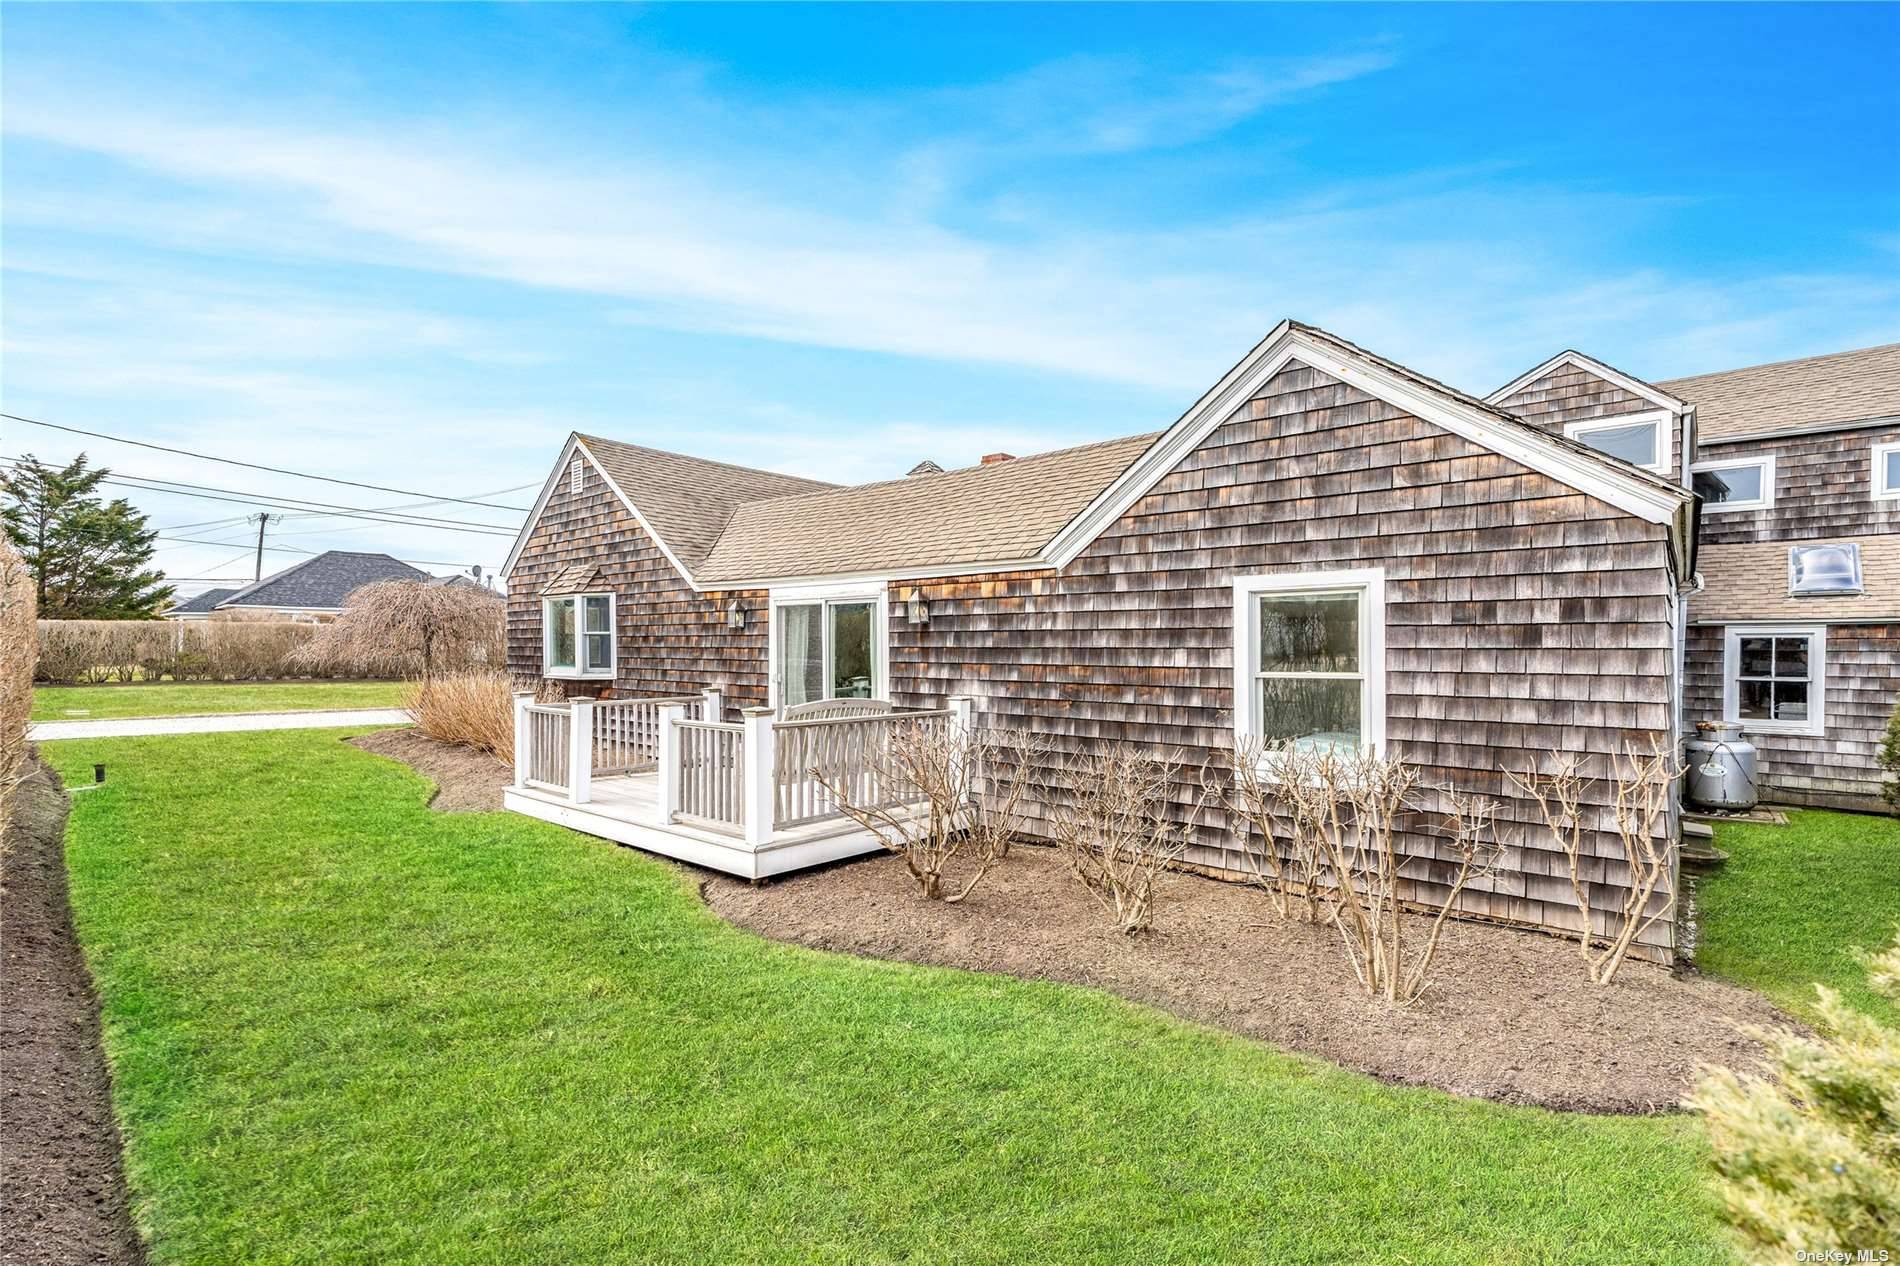 Perfect Beach Cottage on the bay in Quogue.